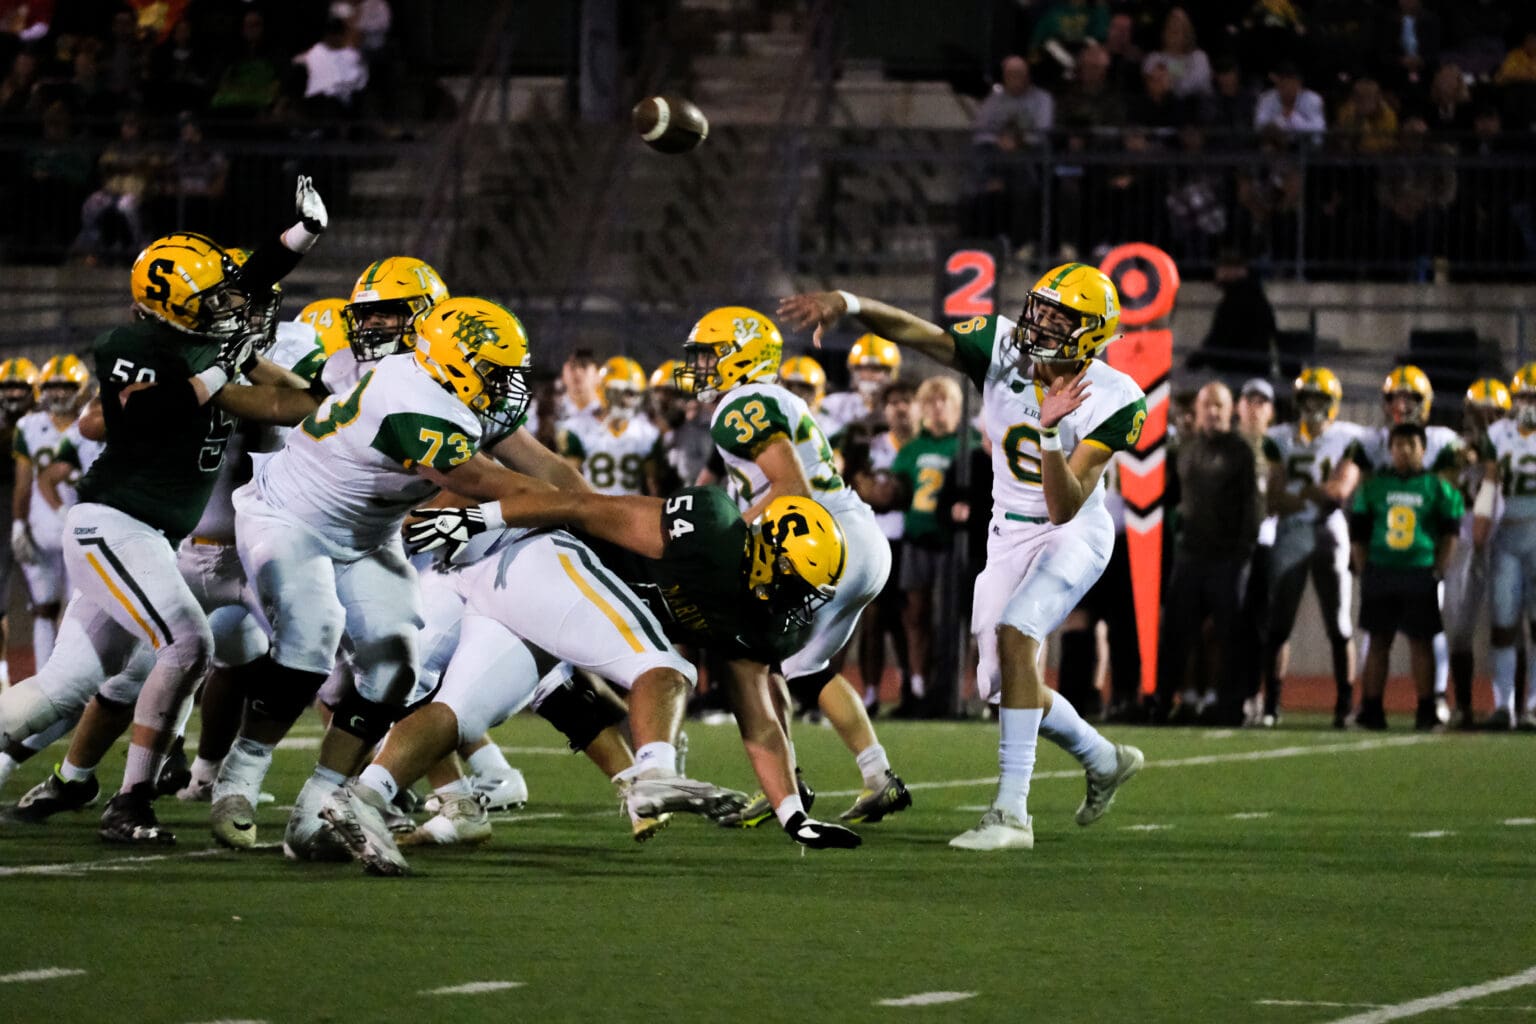 Lynden sophomore quarterback Brant Heppner throws a pass over the crowded players in front of him.